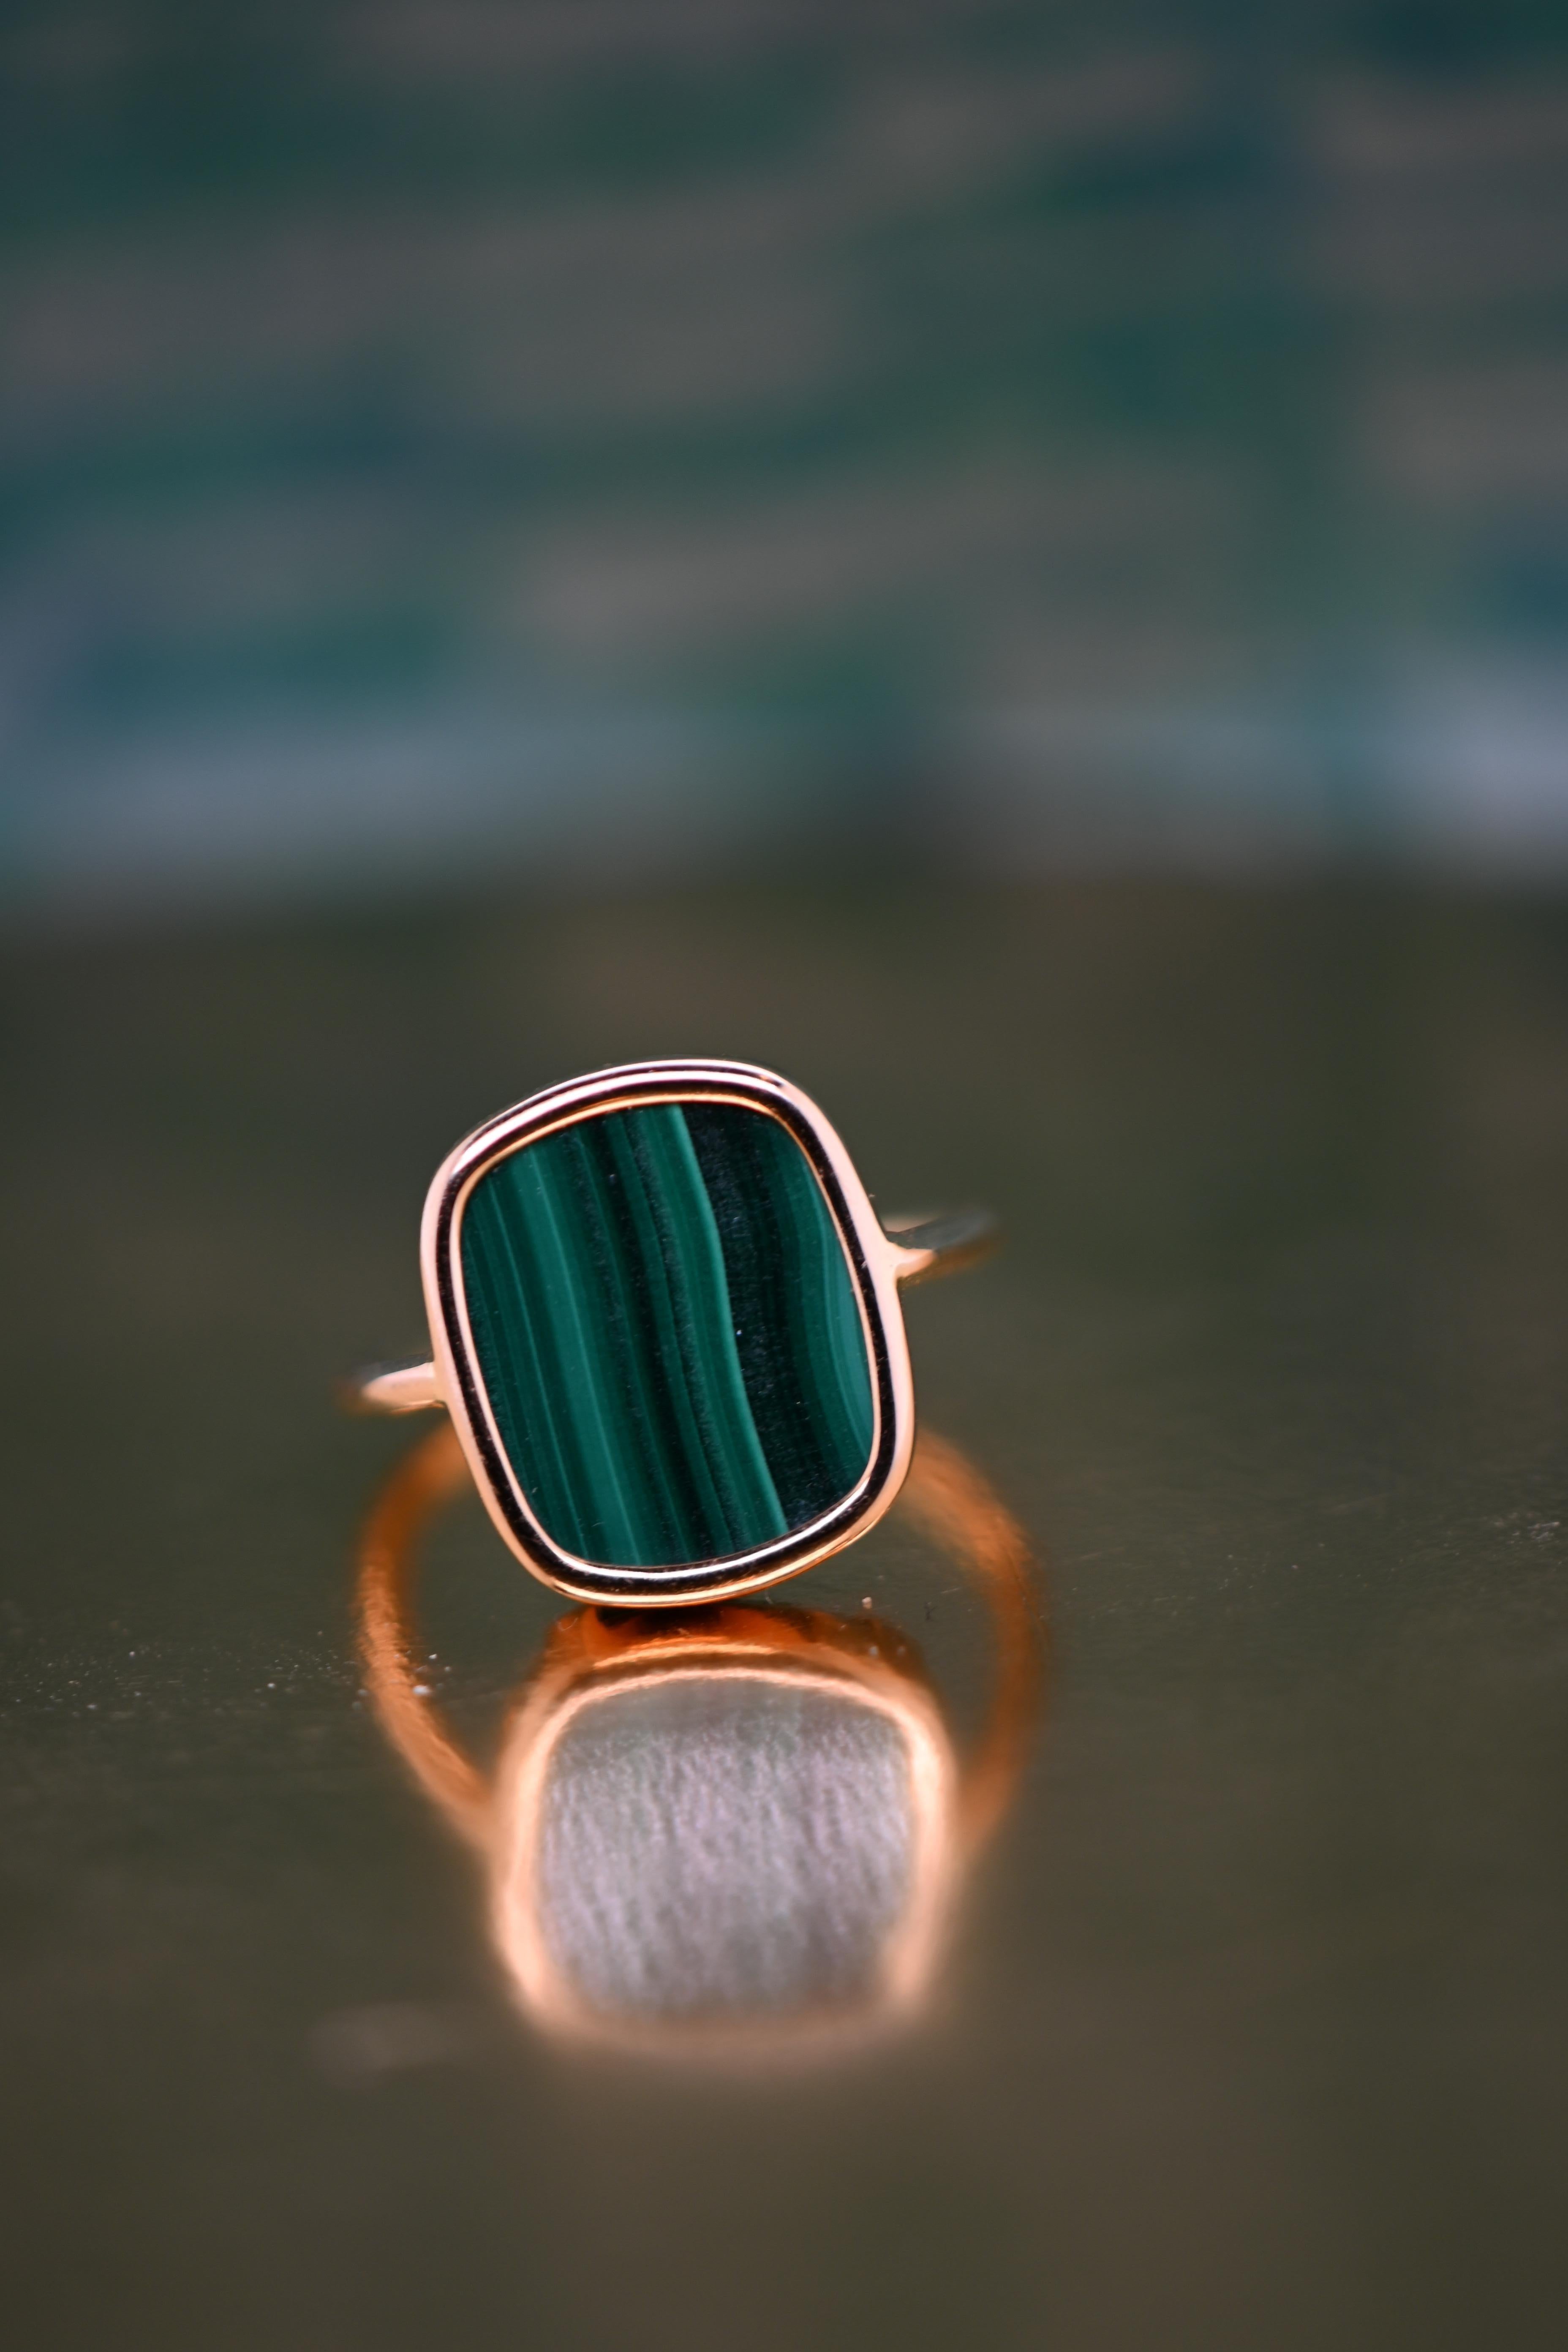 18k rose gold, a symbol of luxury and elegance, is crafted with meticulous craftsmanship to create this dazzlingly beautiful ring. Malachite, with its mesmerizing shades of green, lends a touch of sophistication and mystery to this creation. Each